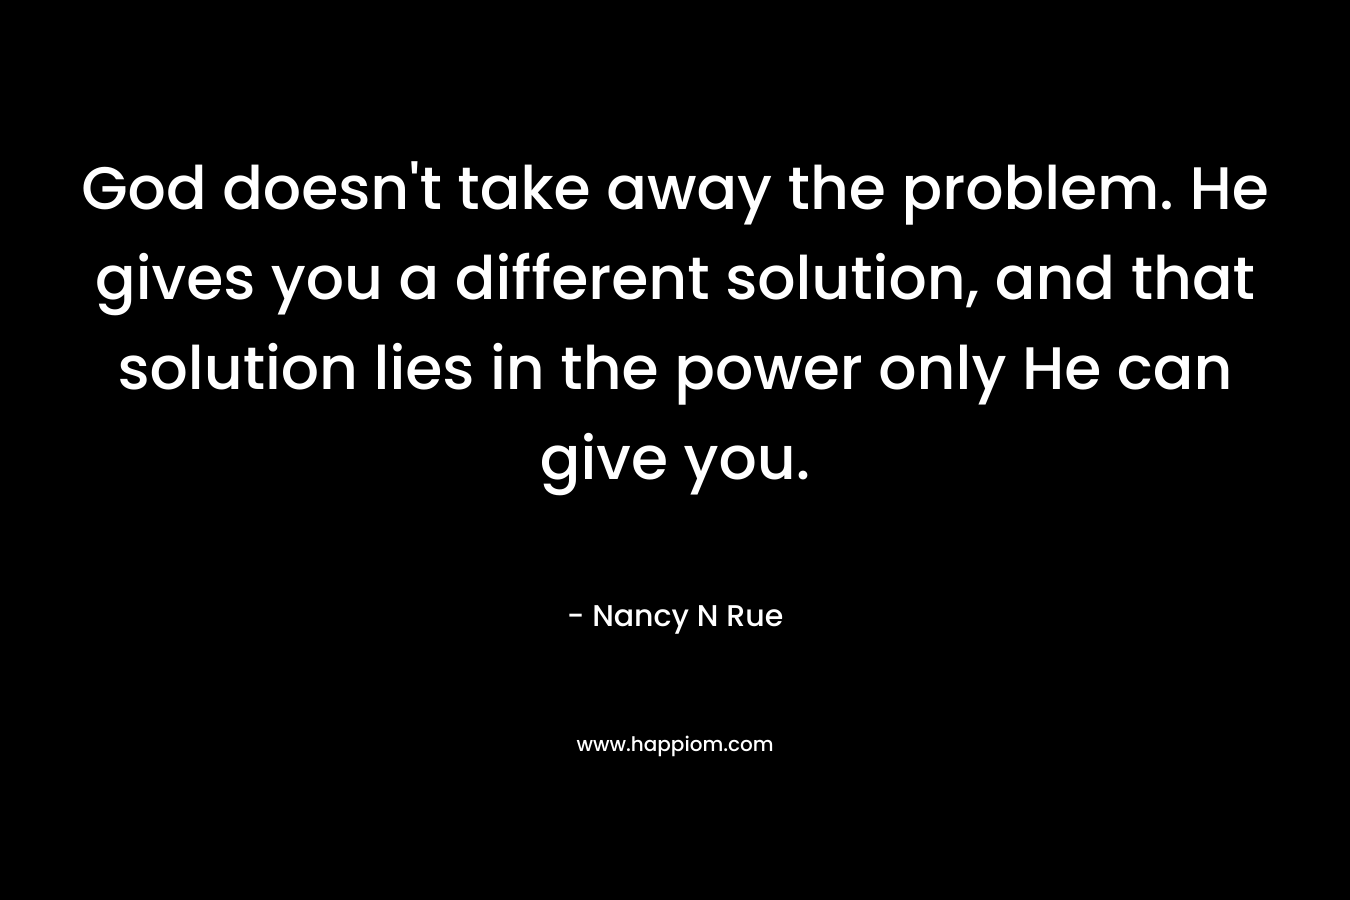 God doesn’t take away the problem. He gives you a different solution, and that solution lies in the power only He can give you. – Nancy N Rue